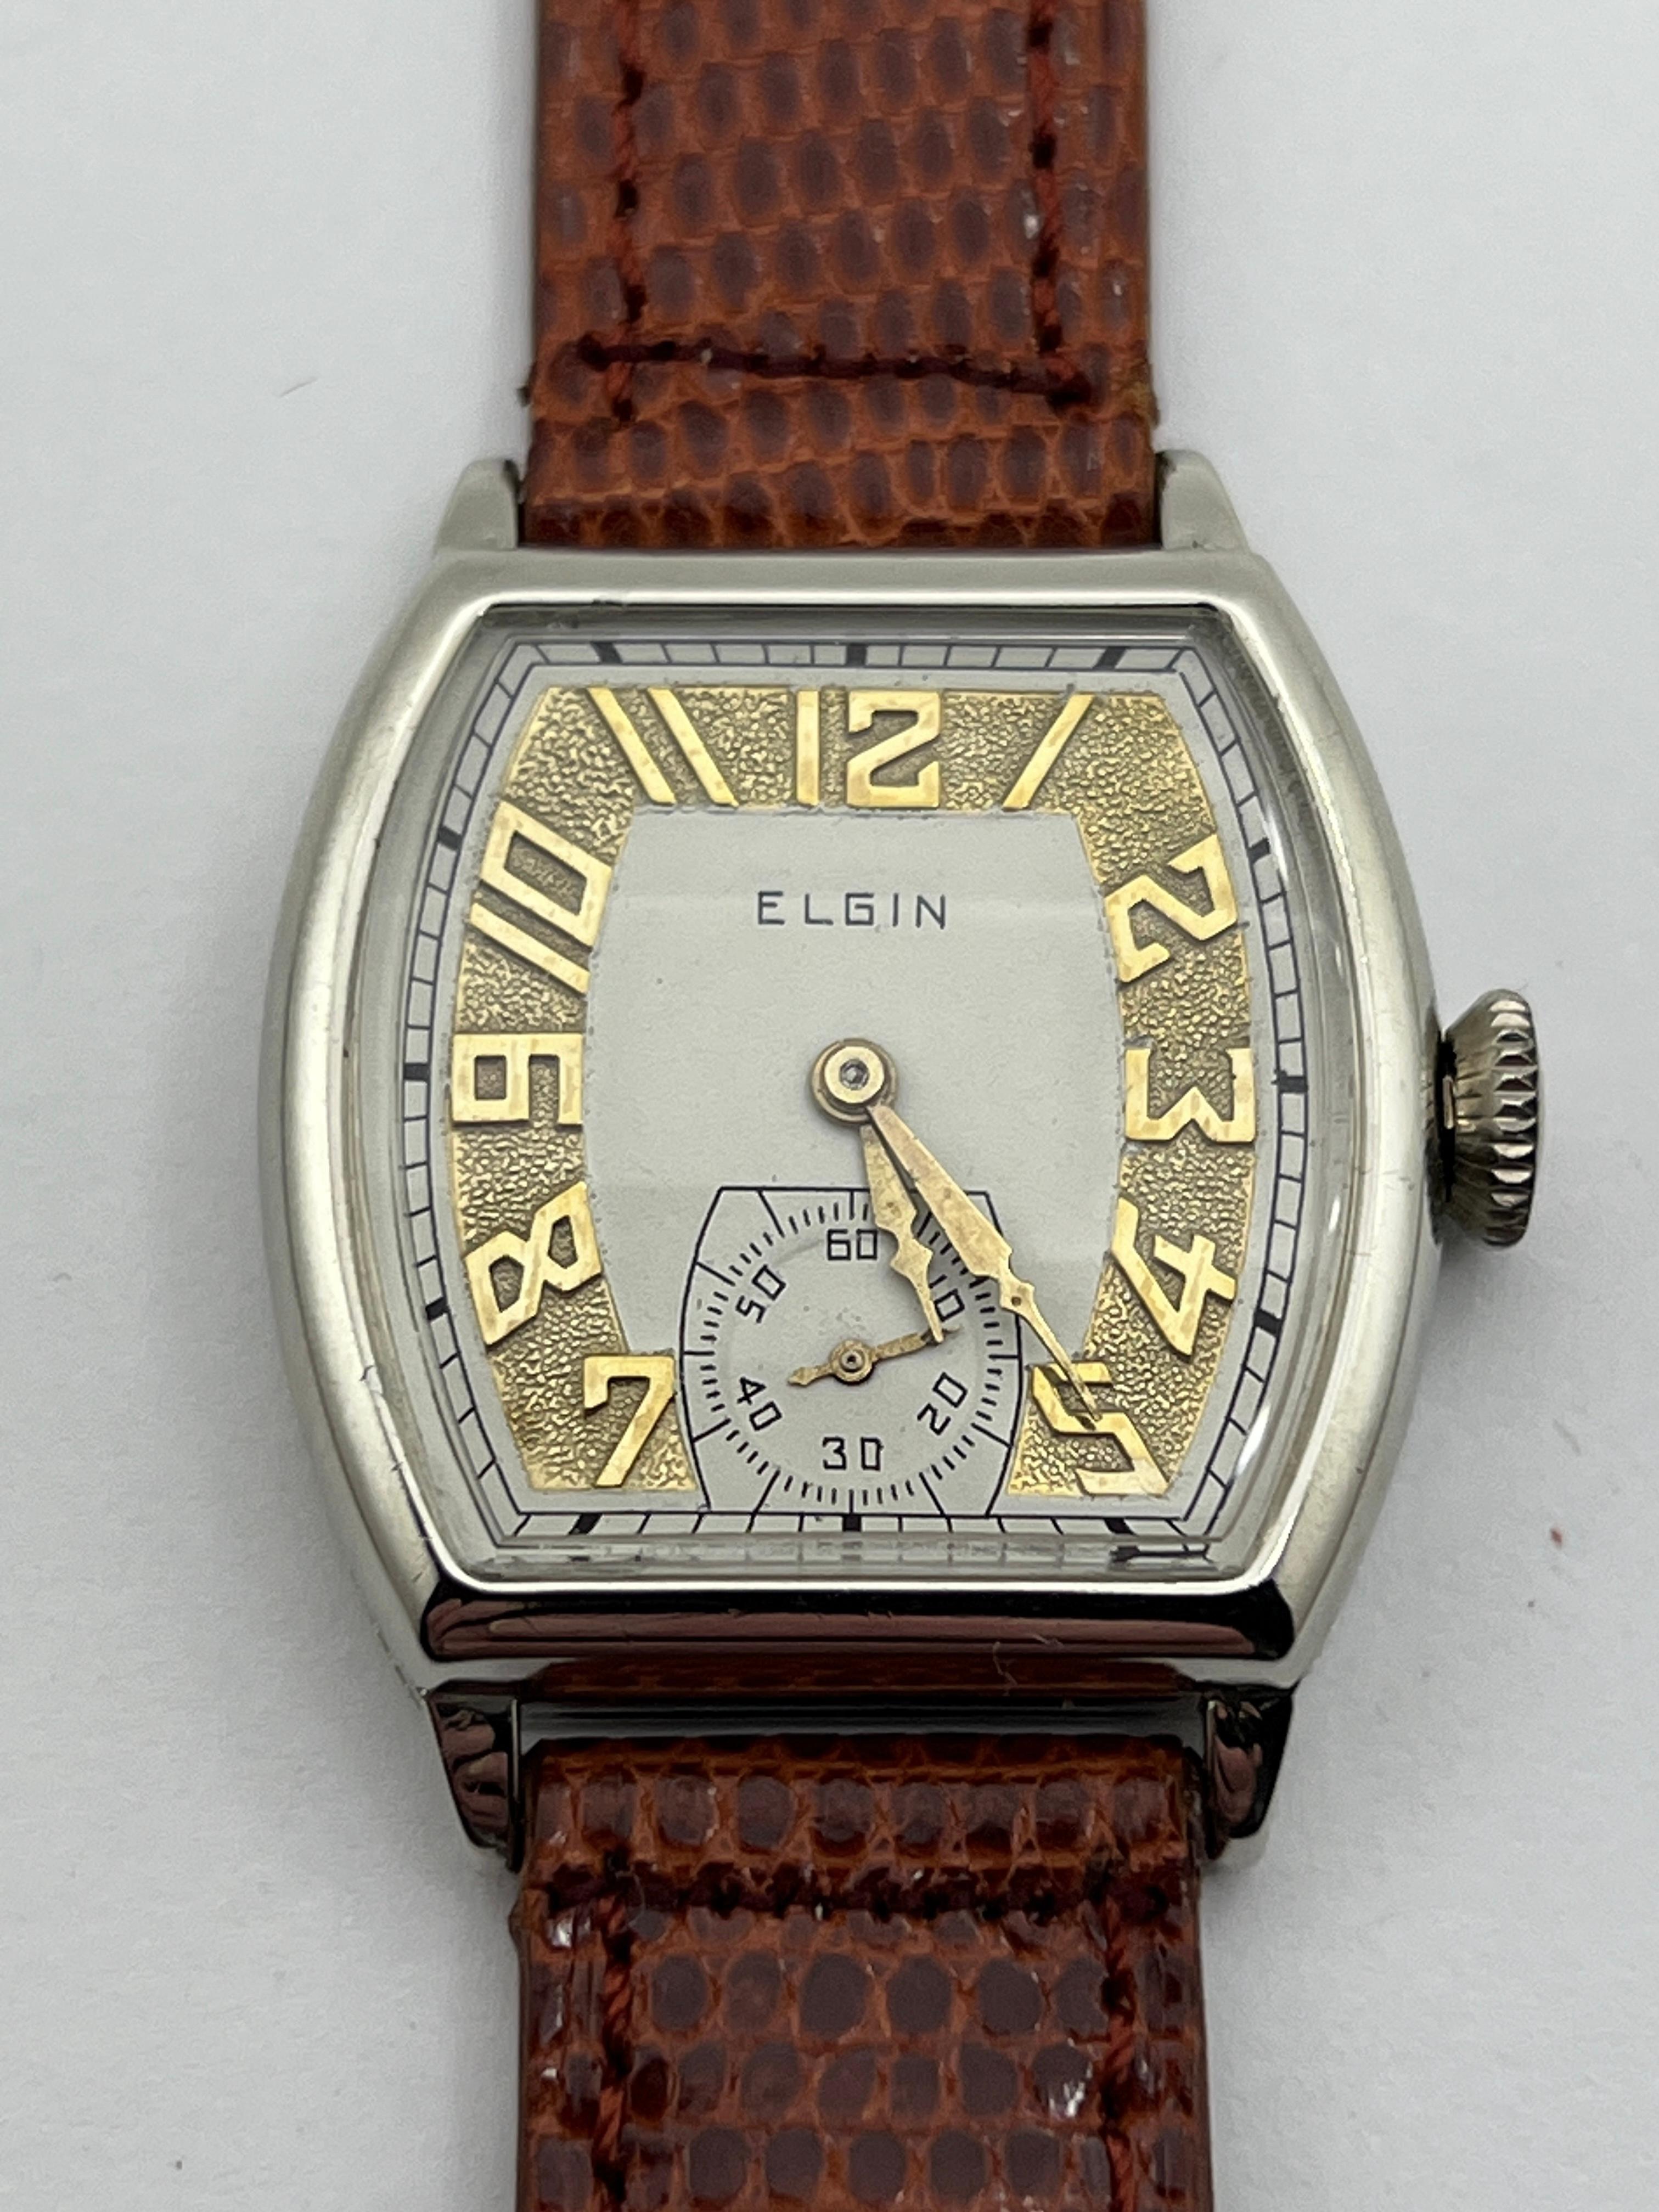 Solid Gold 1930 Elgin Art Deco Watch with a Chased Bezel Restored 7